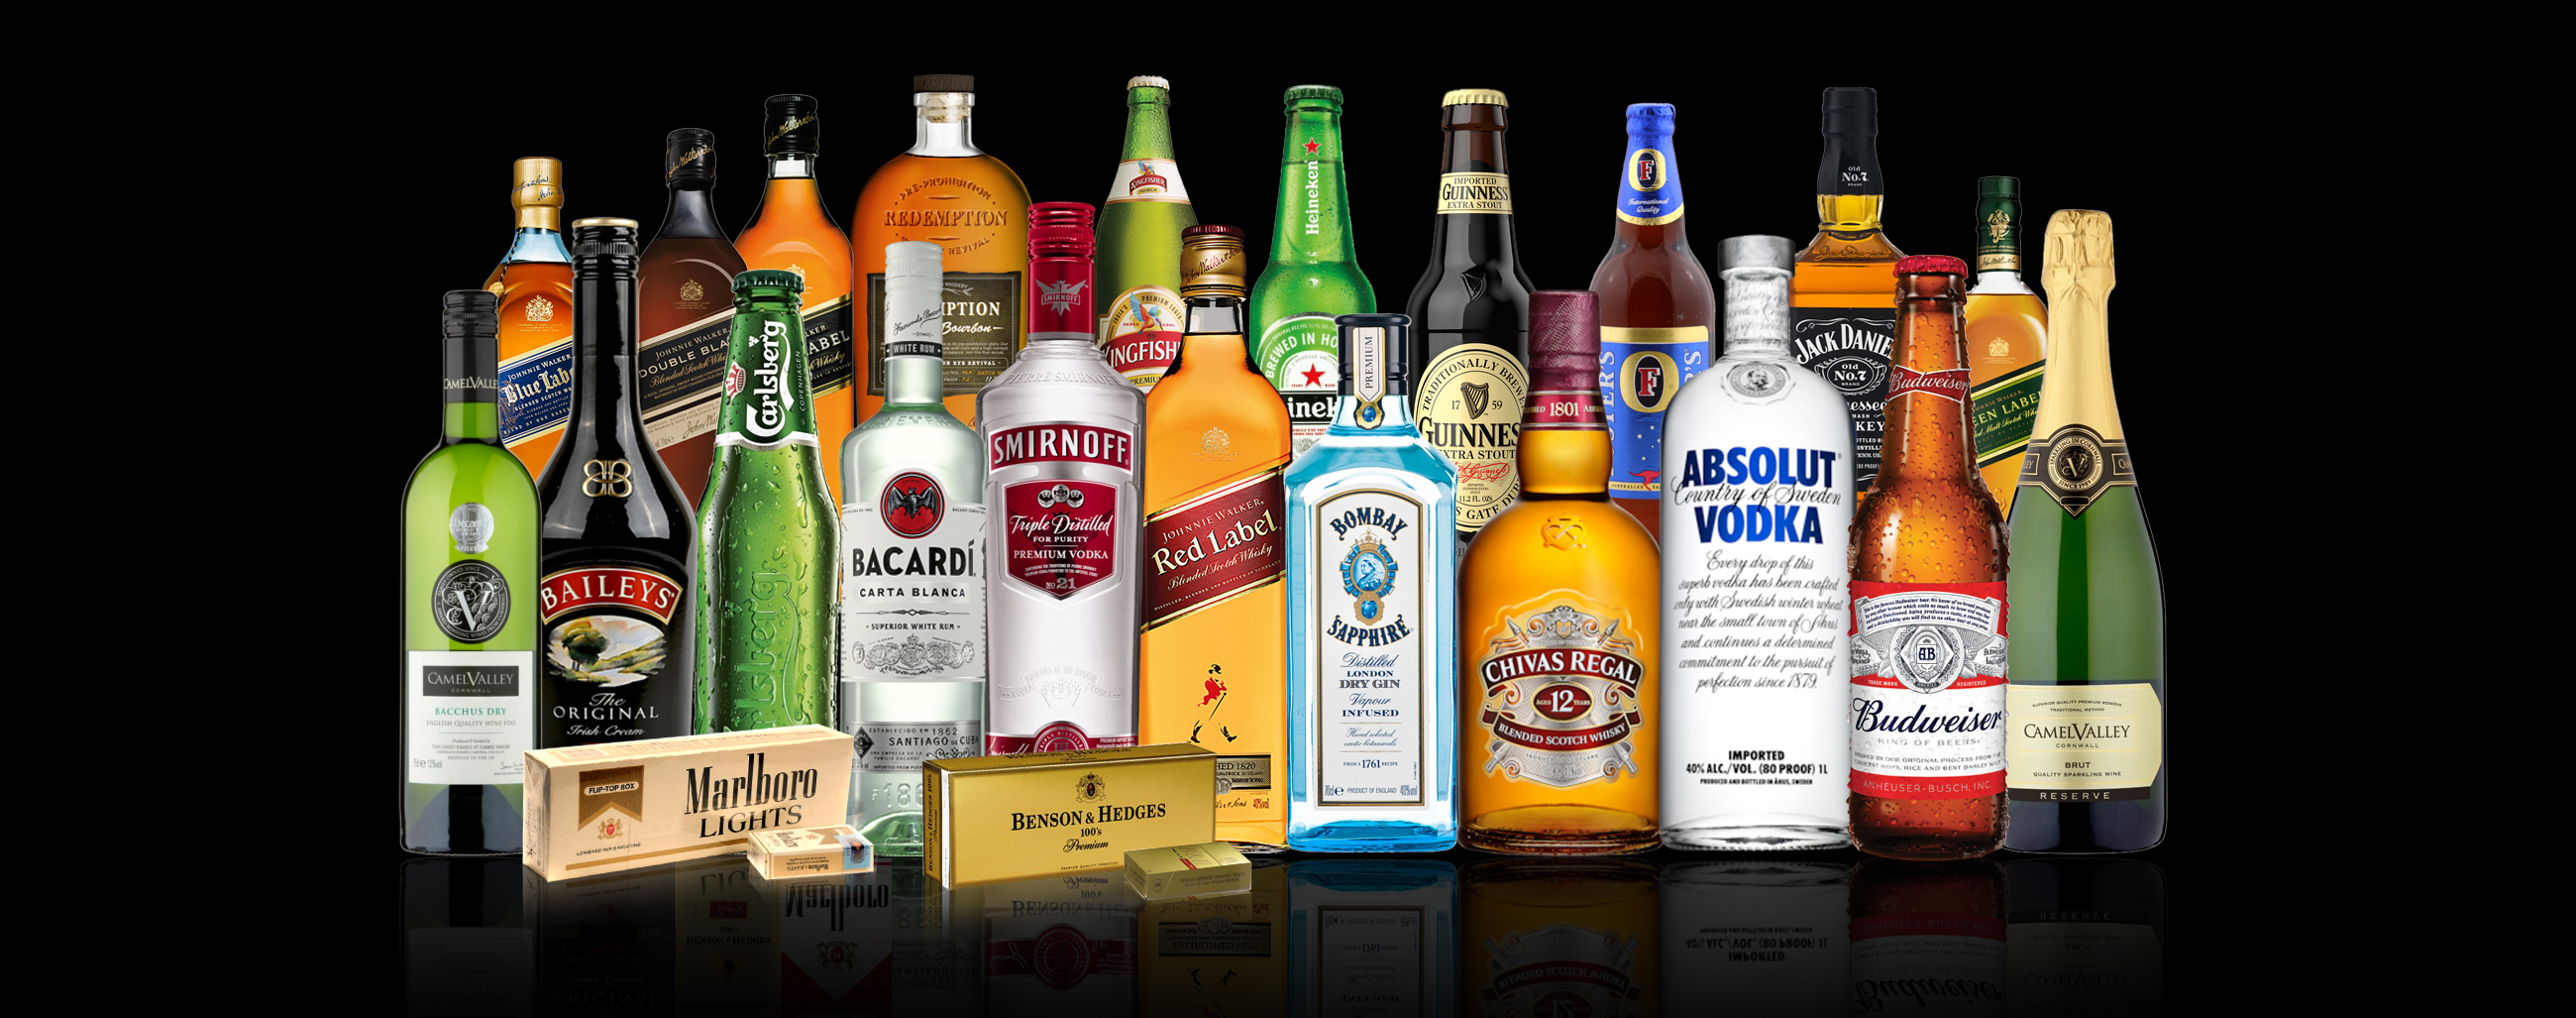 Wholesale Importer & Distributor of Beers, Spirits, and Tobacco in Dubai